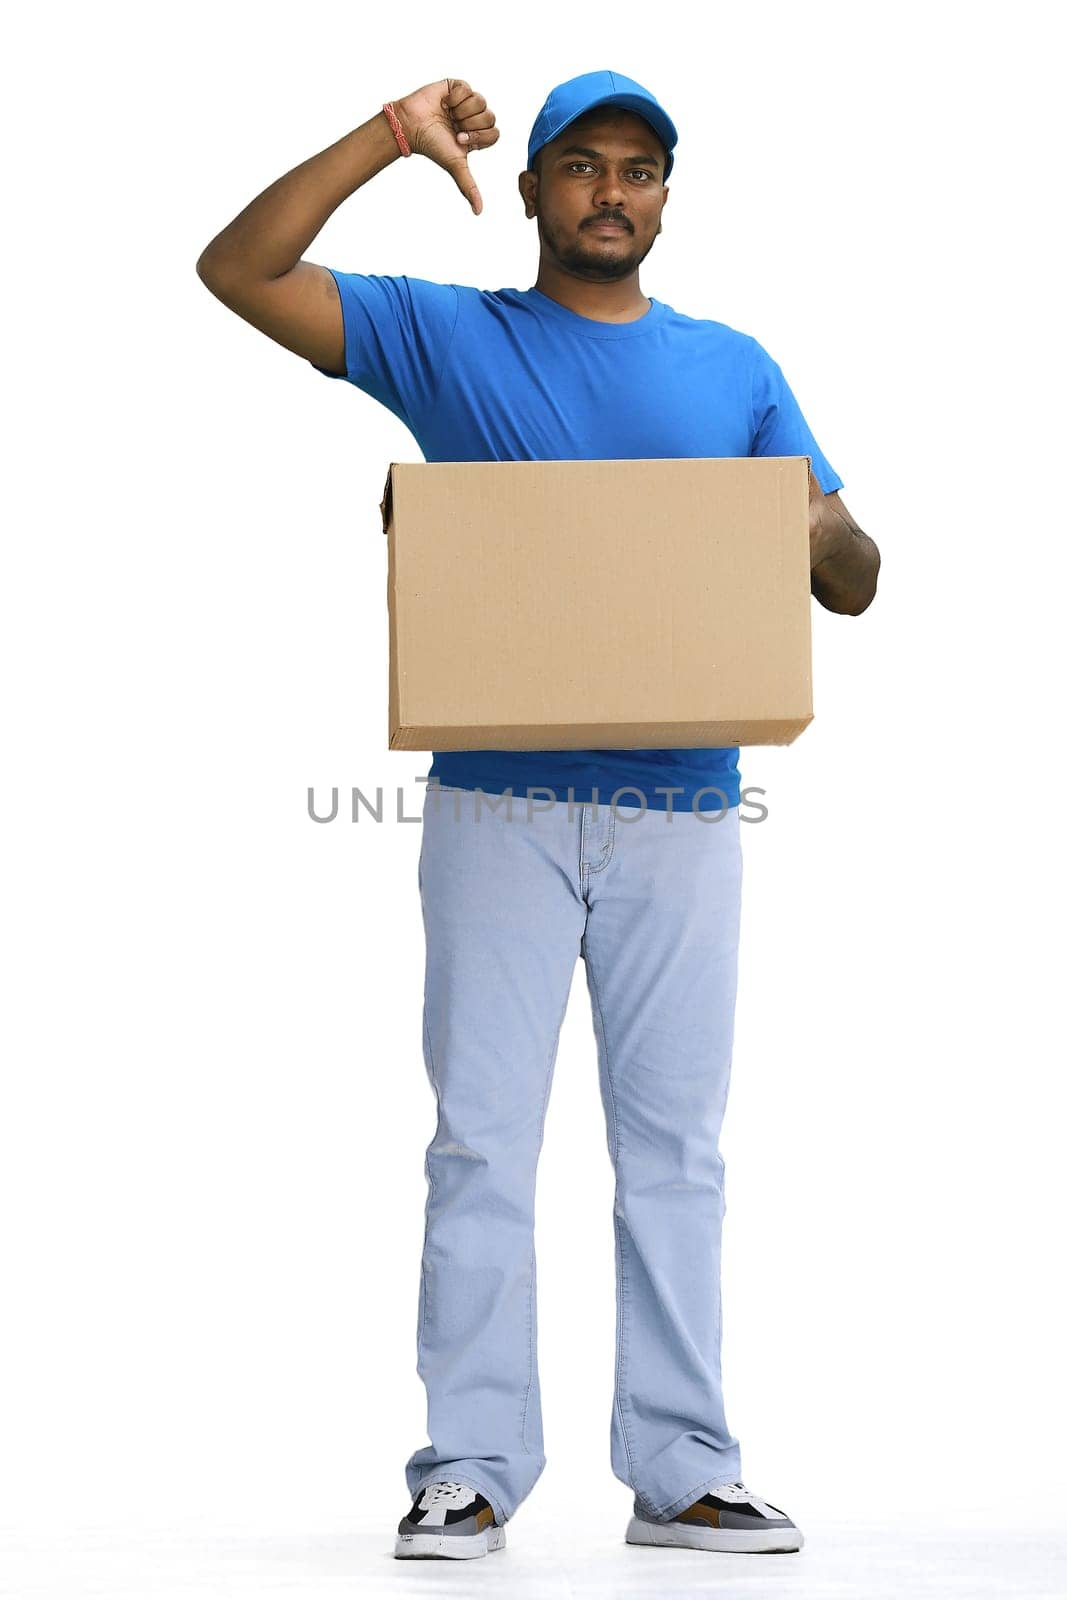 A male deliveryman with a box, on a white background, in full height, points at himself.